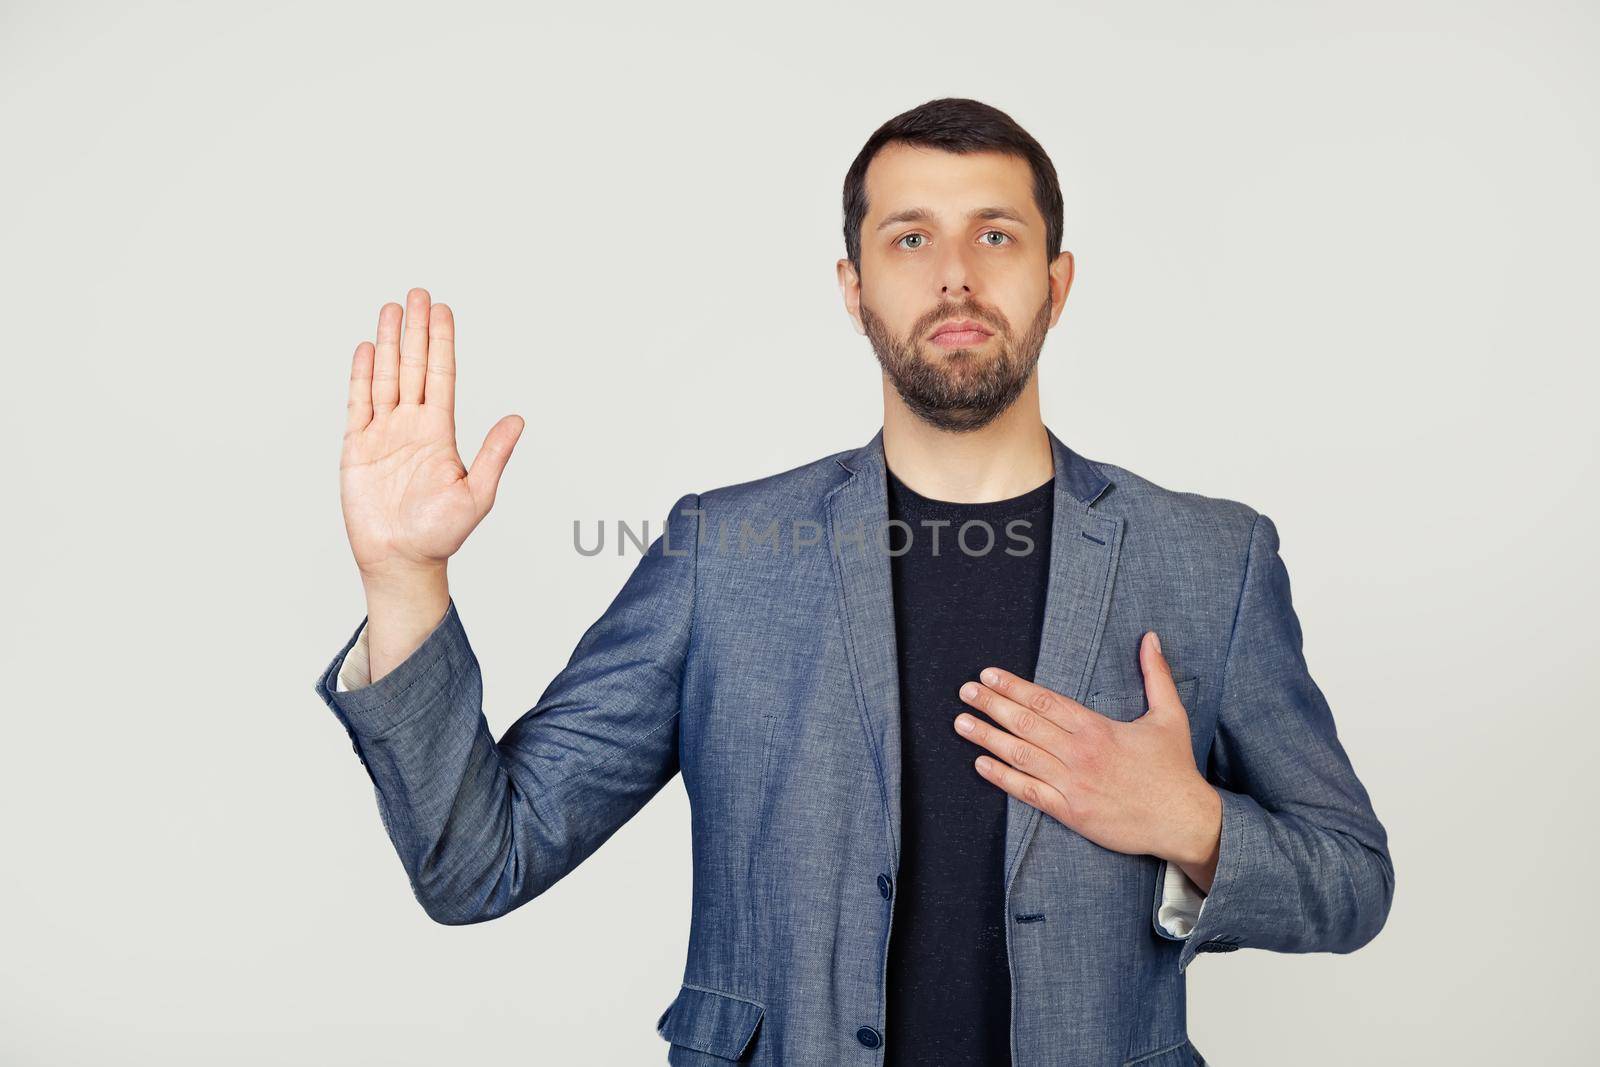 Young businessman man with a beard in a jacket, swears, putting his hand on his chest and open palm, making an oath of promise of loyalty. Portrait of a man on a gray background.